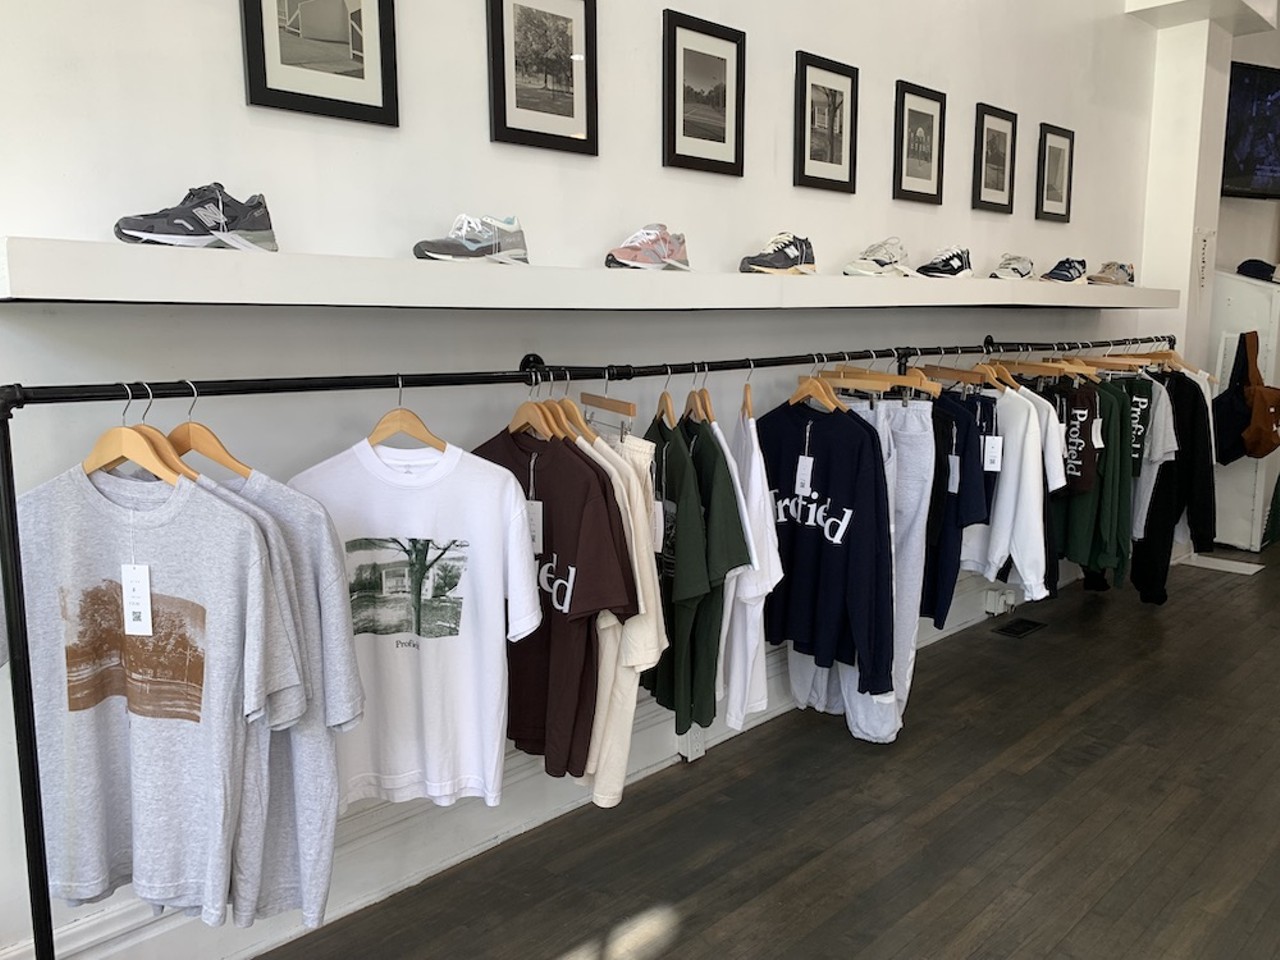 Profield Reserve
2309 Cherokee Street, 314-669-9003 
This homegrown apparel brand sells durable athletic and leisure wear that are made in-house in small batches. St. Louis doesn’t have many apparel brands, but this one reps us well. 